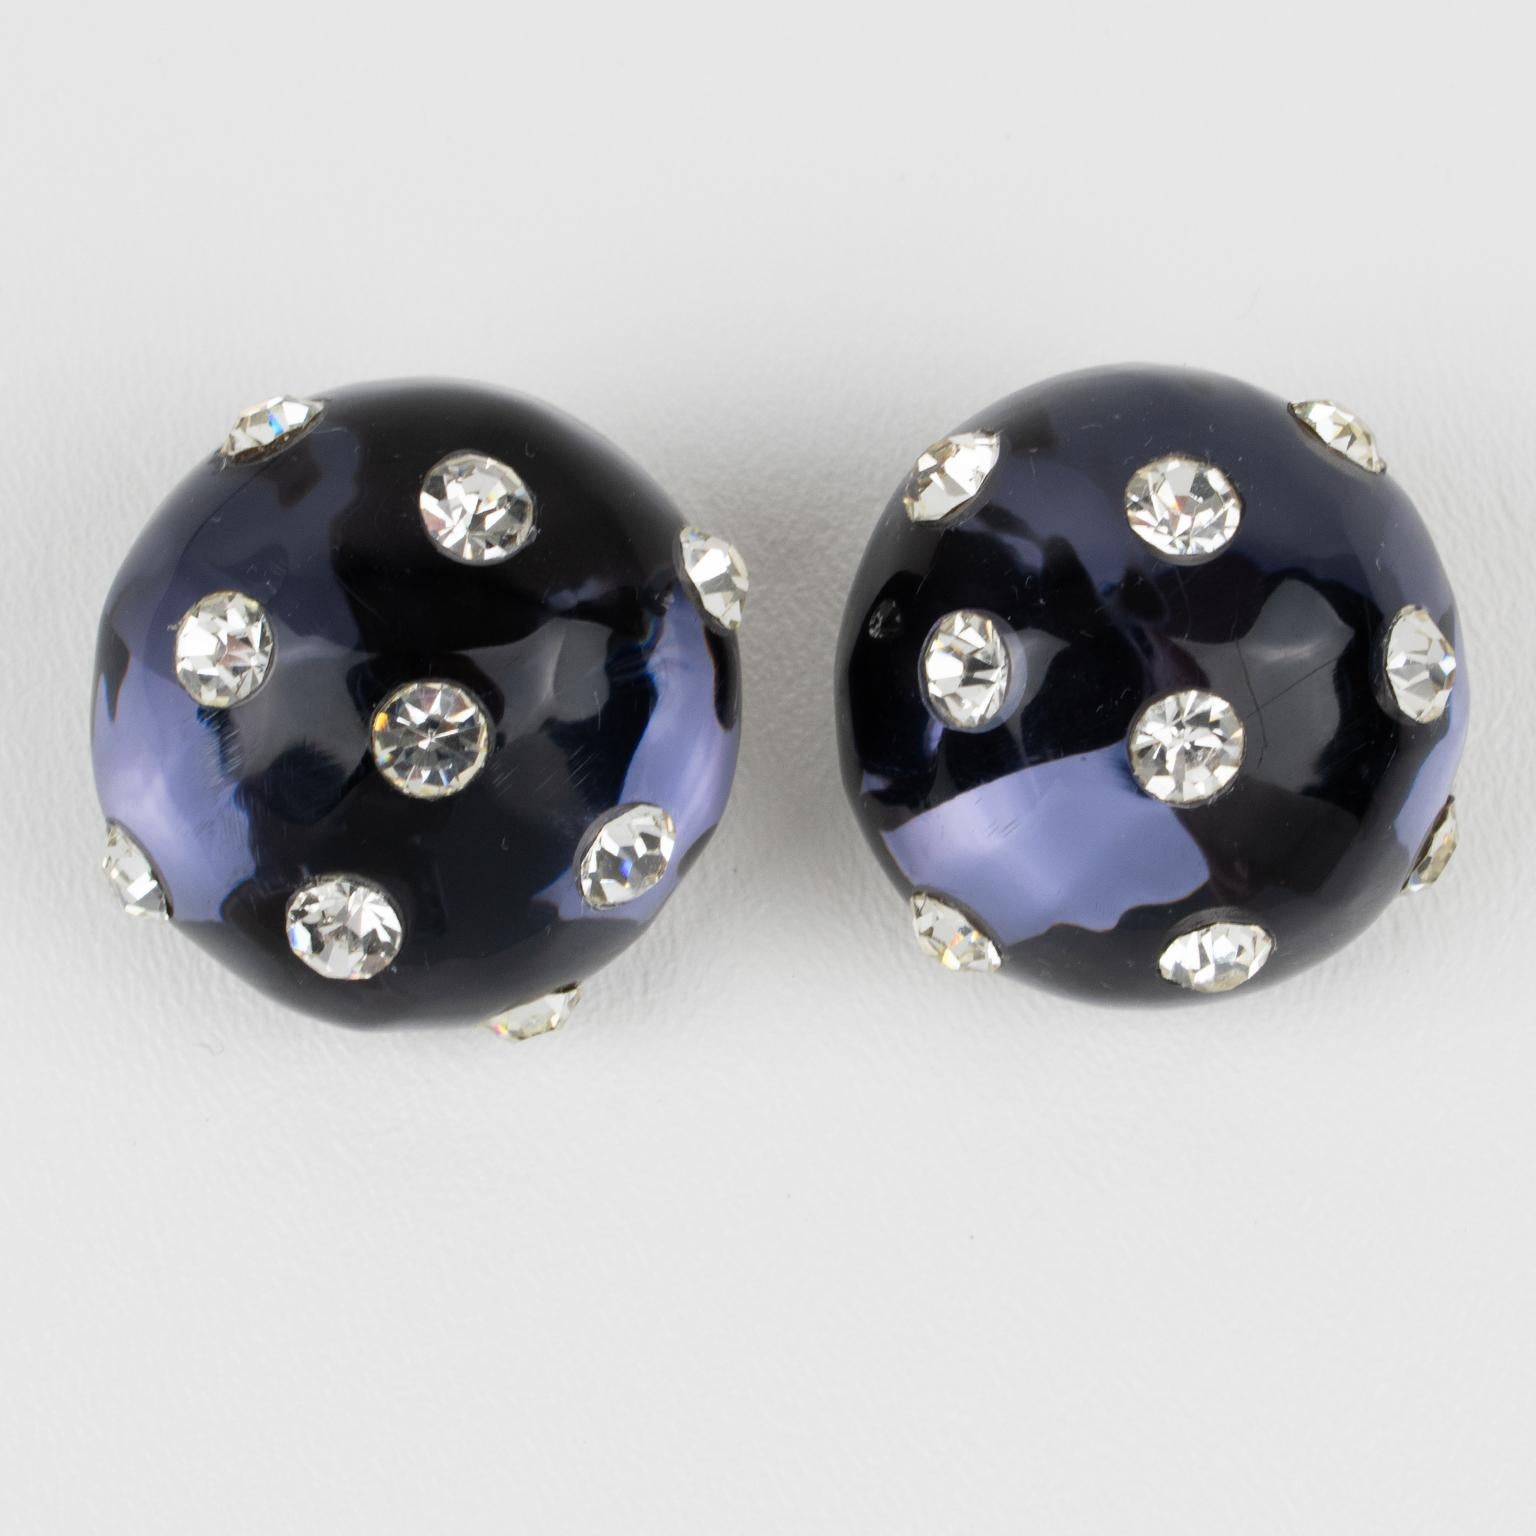 Modernist Kaso Navy Blue Lucite Clip Earrings with Rhinestones Paved